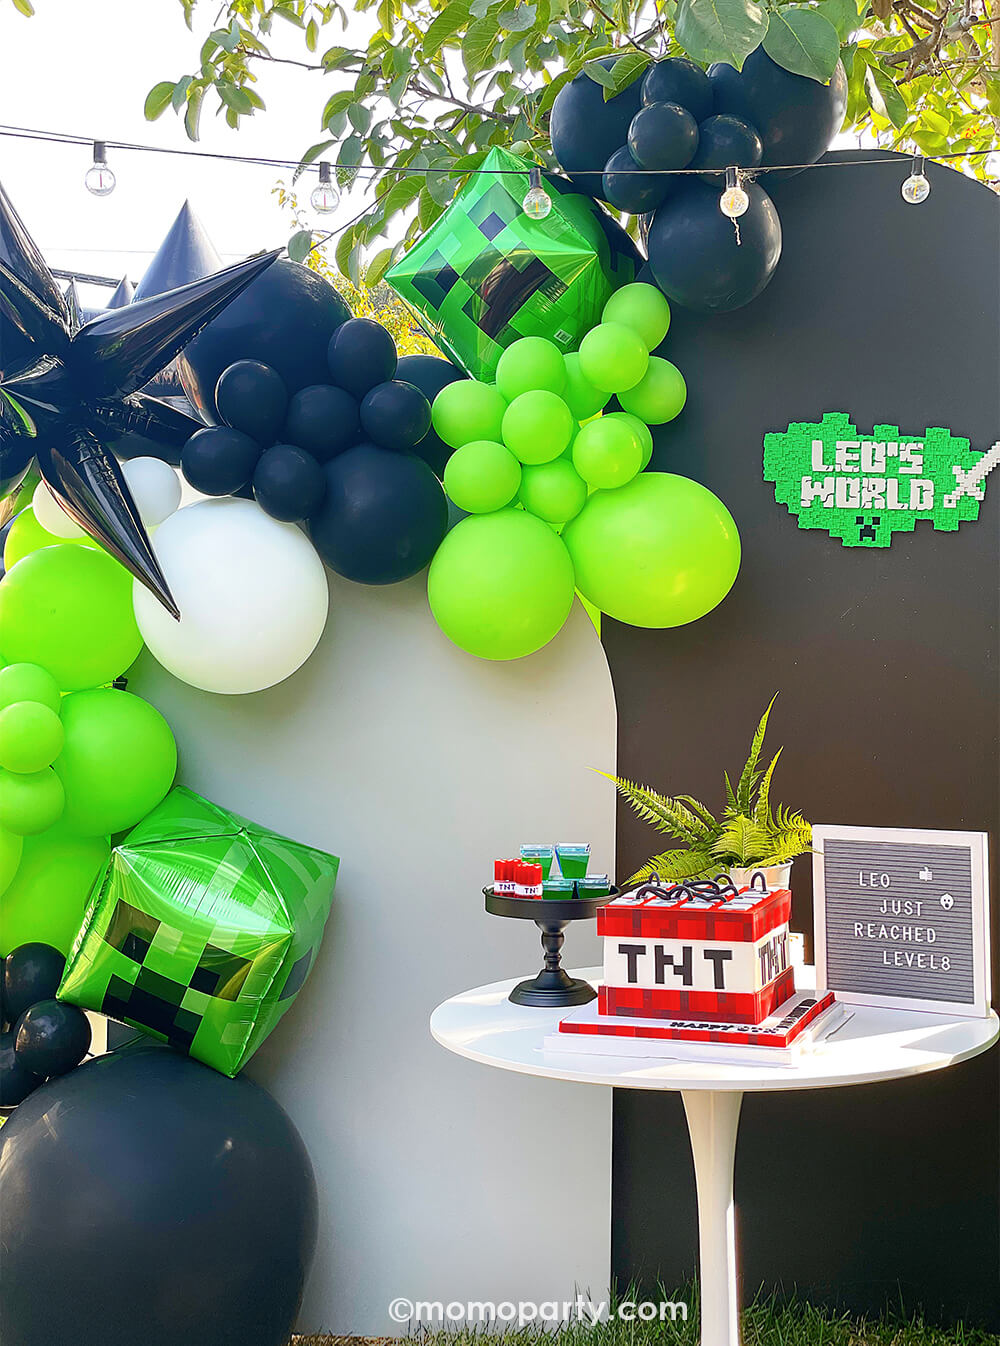 Minecraft themed Birthday Party Ideas by Momo Party. Featuring modern party Backdrop with minecraft themed color balloons in green, black, white, and creeper foil balloon, black starburst foil balloon. And TNT cake on the white round dessert table.